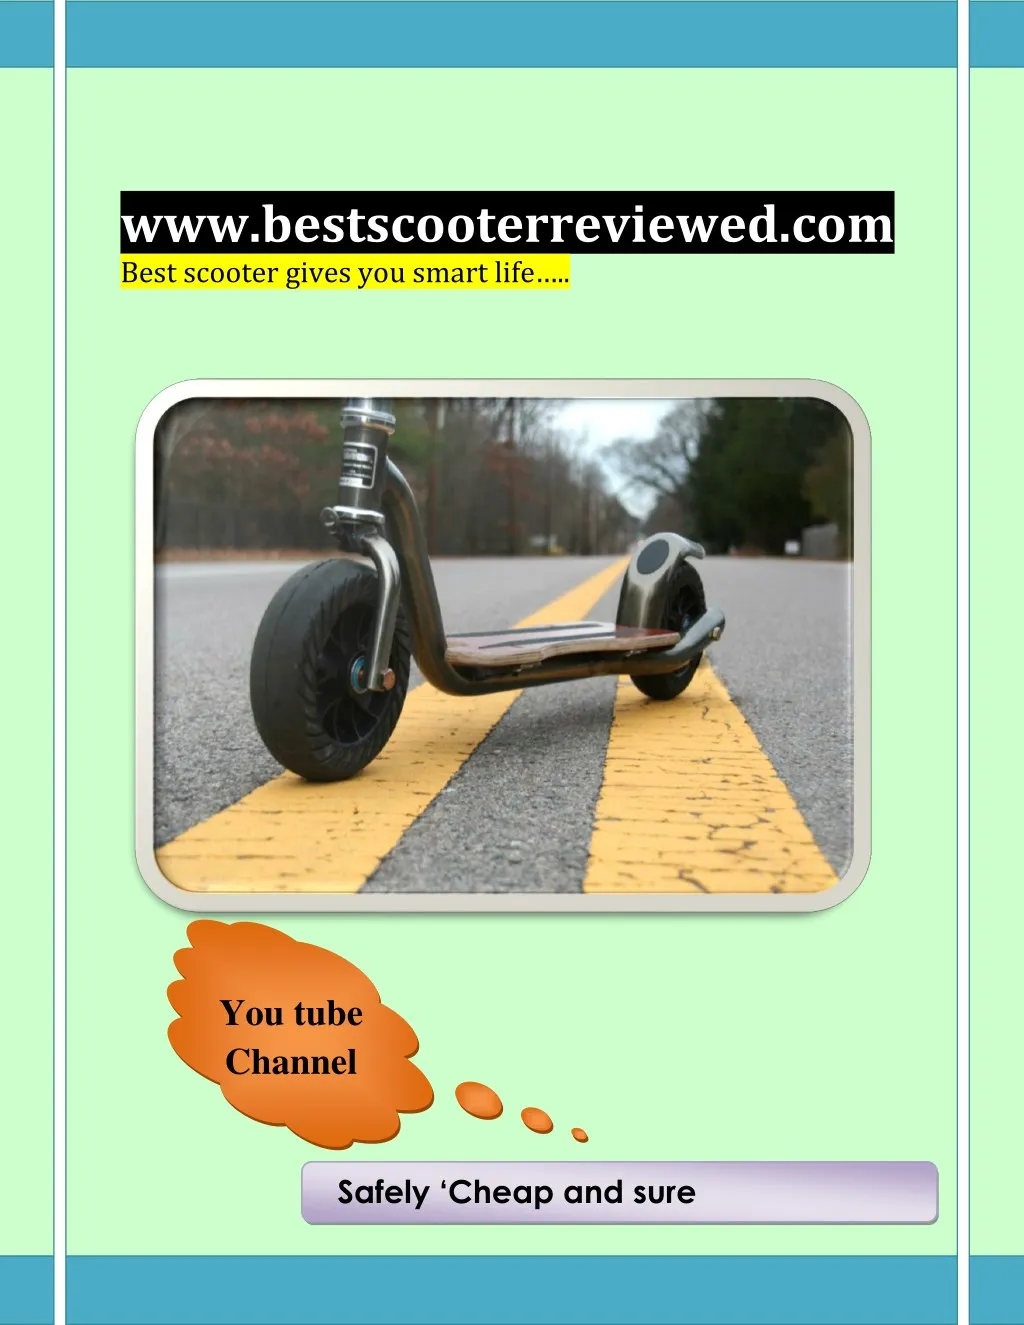 www bestscooterreviewed com best scooter gives